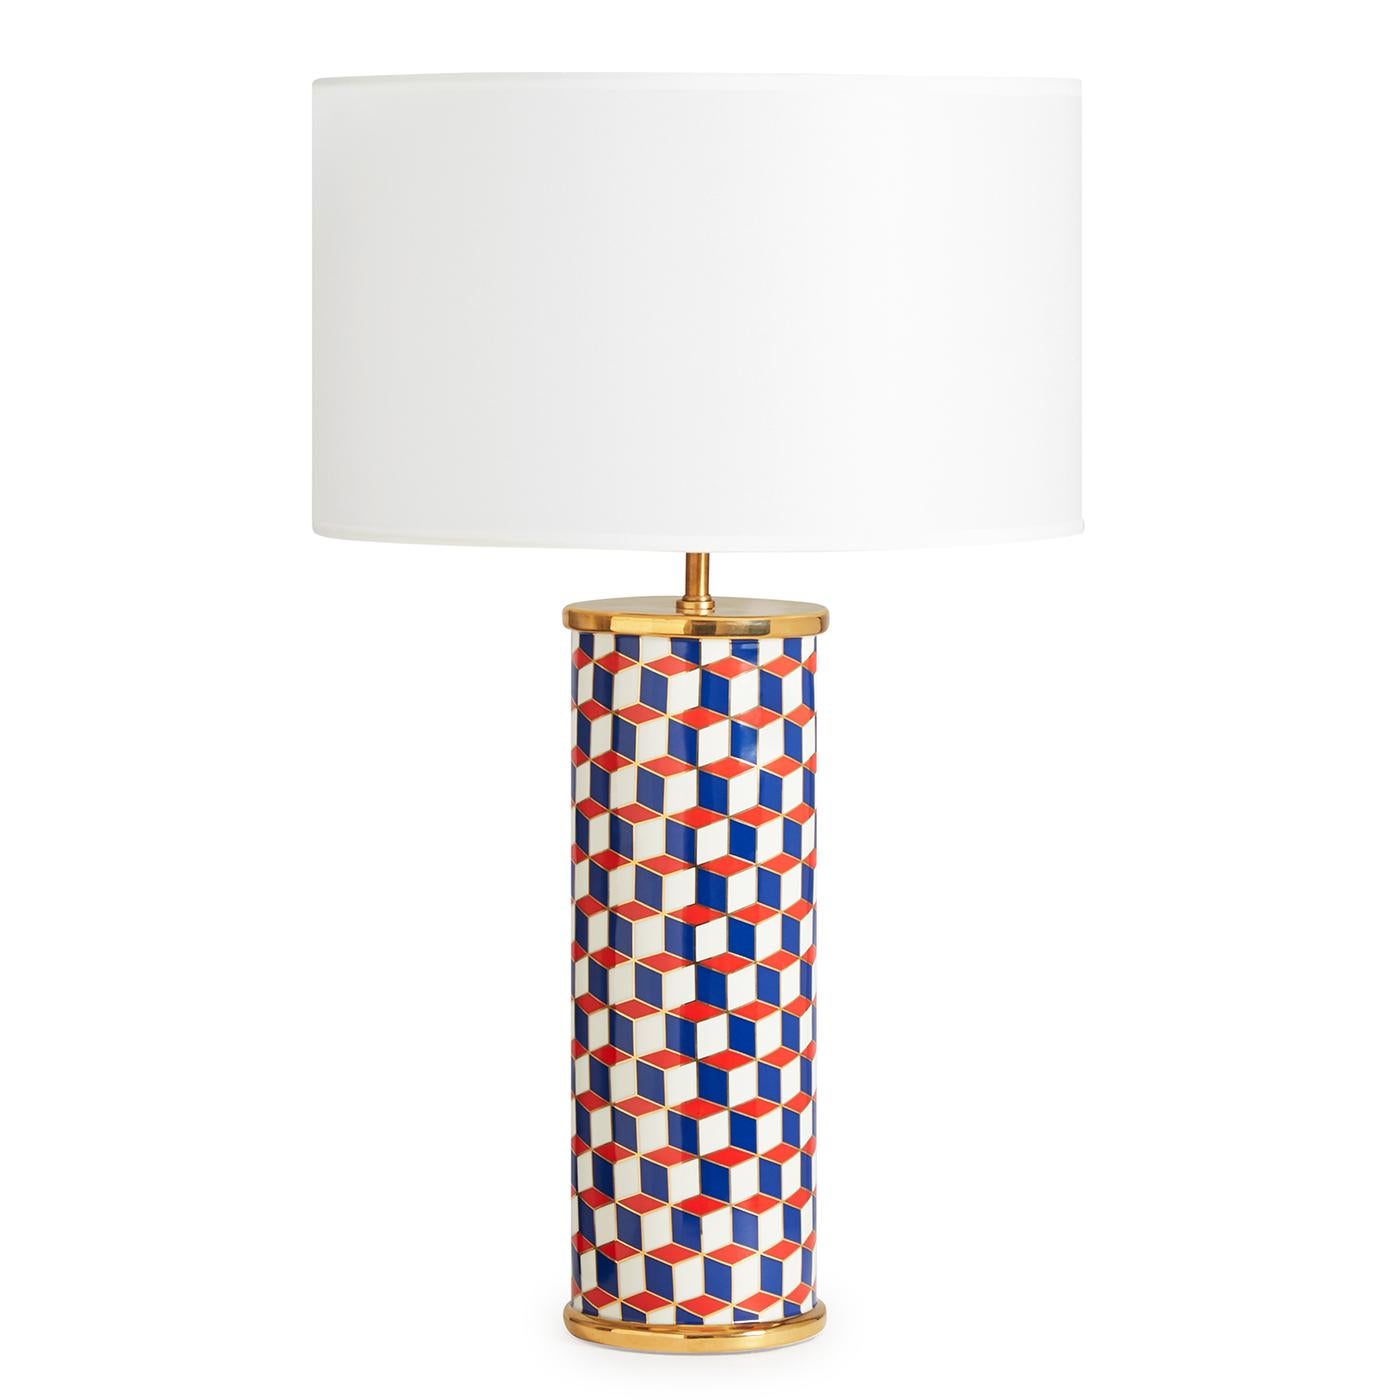 Graphic Pop. A Classic cubes pattern in black and grey or navy and red with gold accents for a spot of sparkle. Our porcelain and polished brass Carnaby Lamp combines a dash of Downtown with a touch of uptown élan. A graphic addition to any